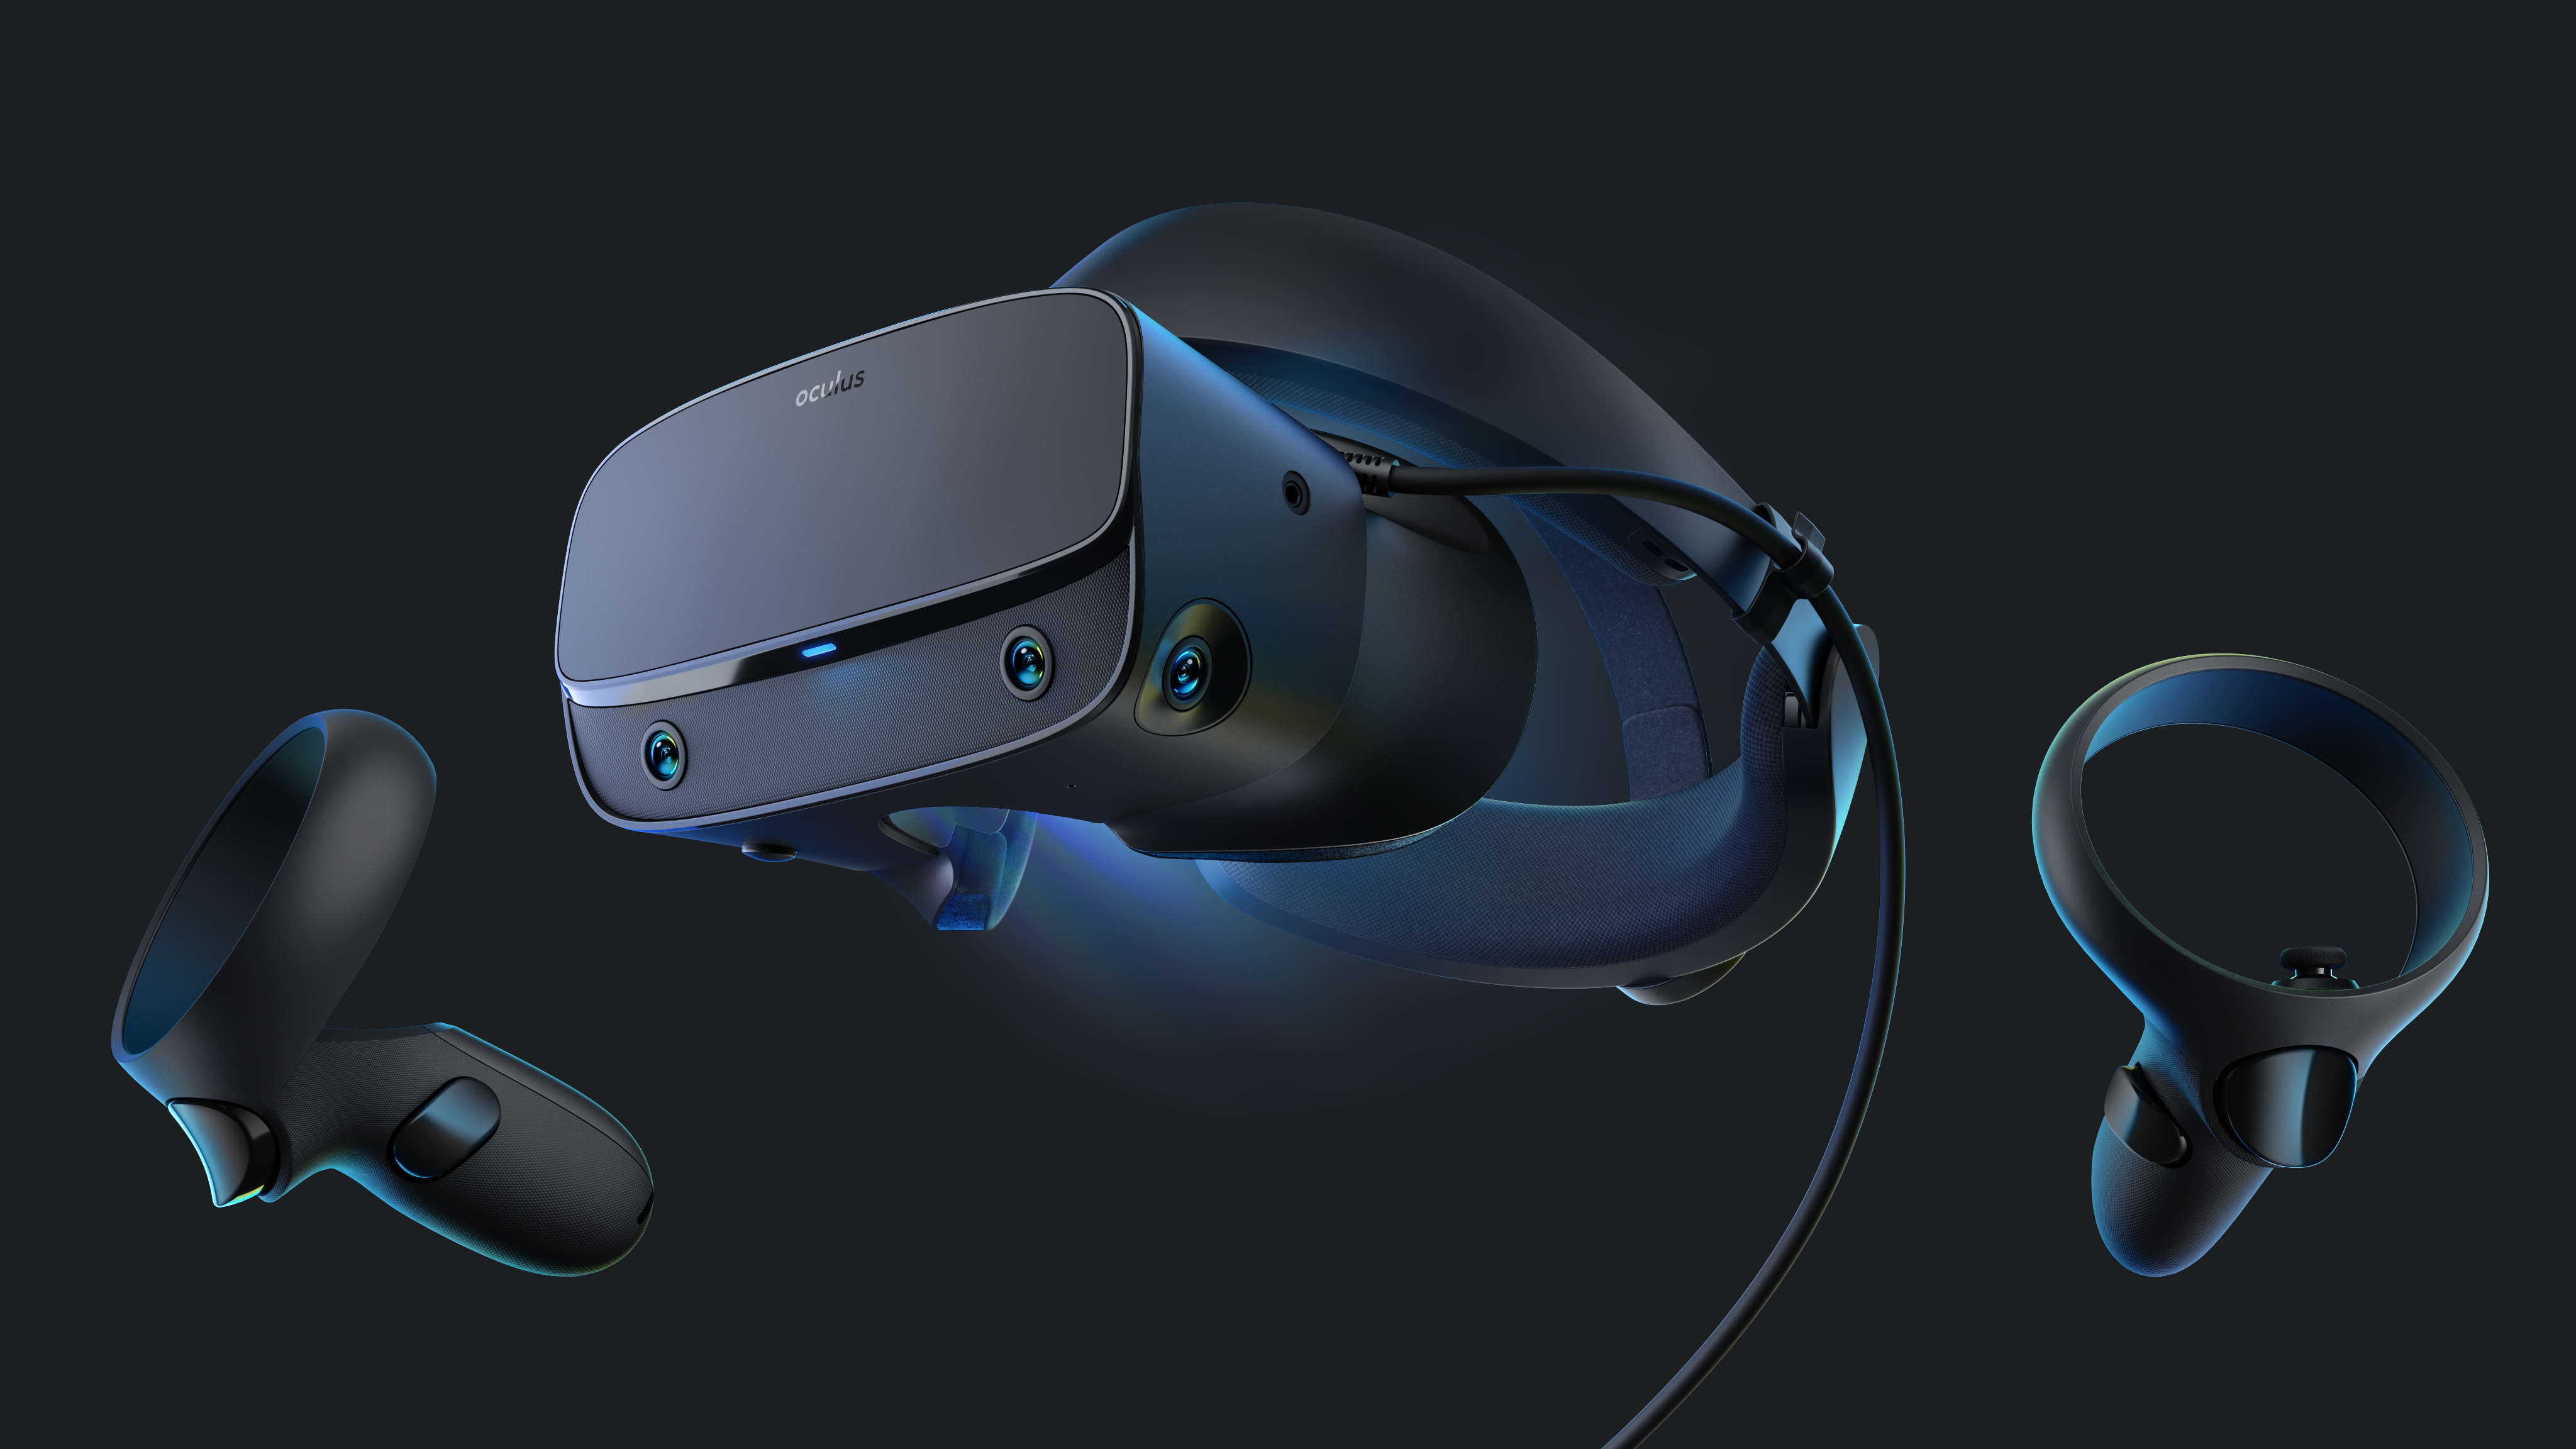 The Oculus Rift S real and in spring for TechCrunch